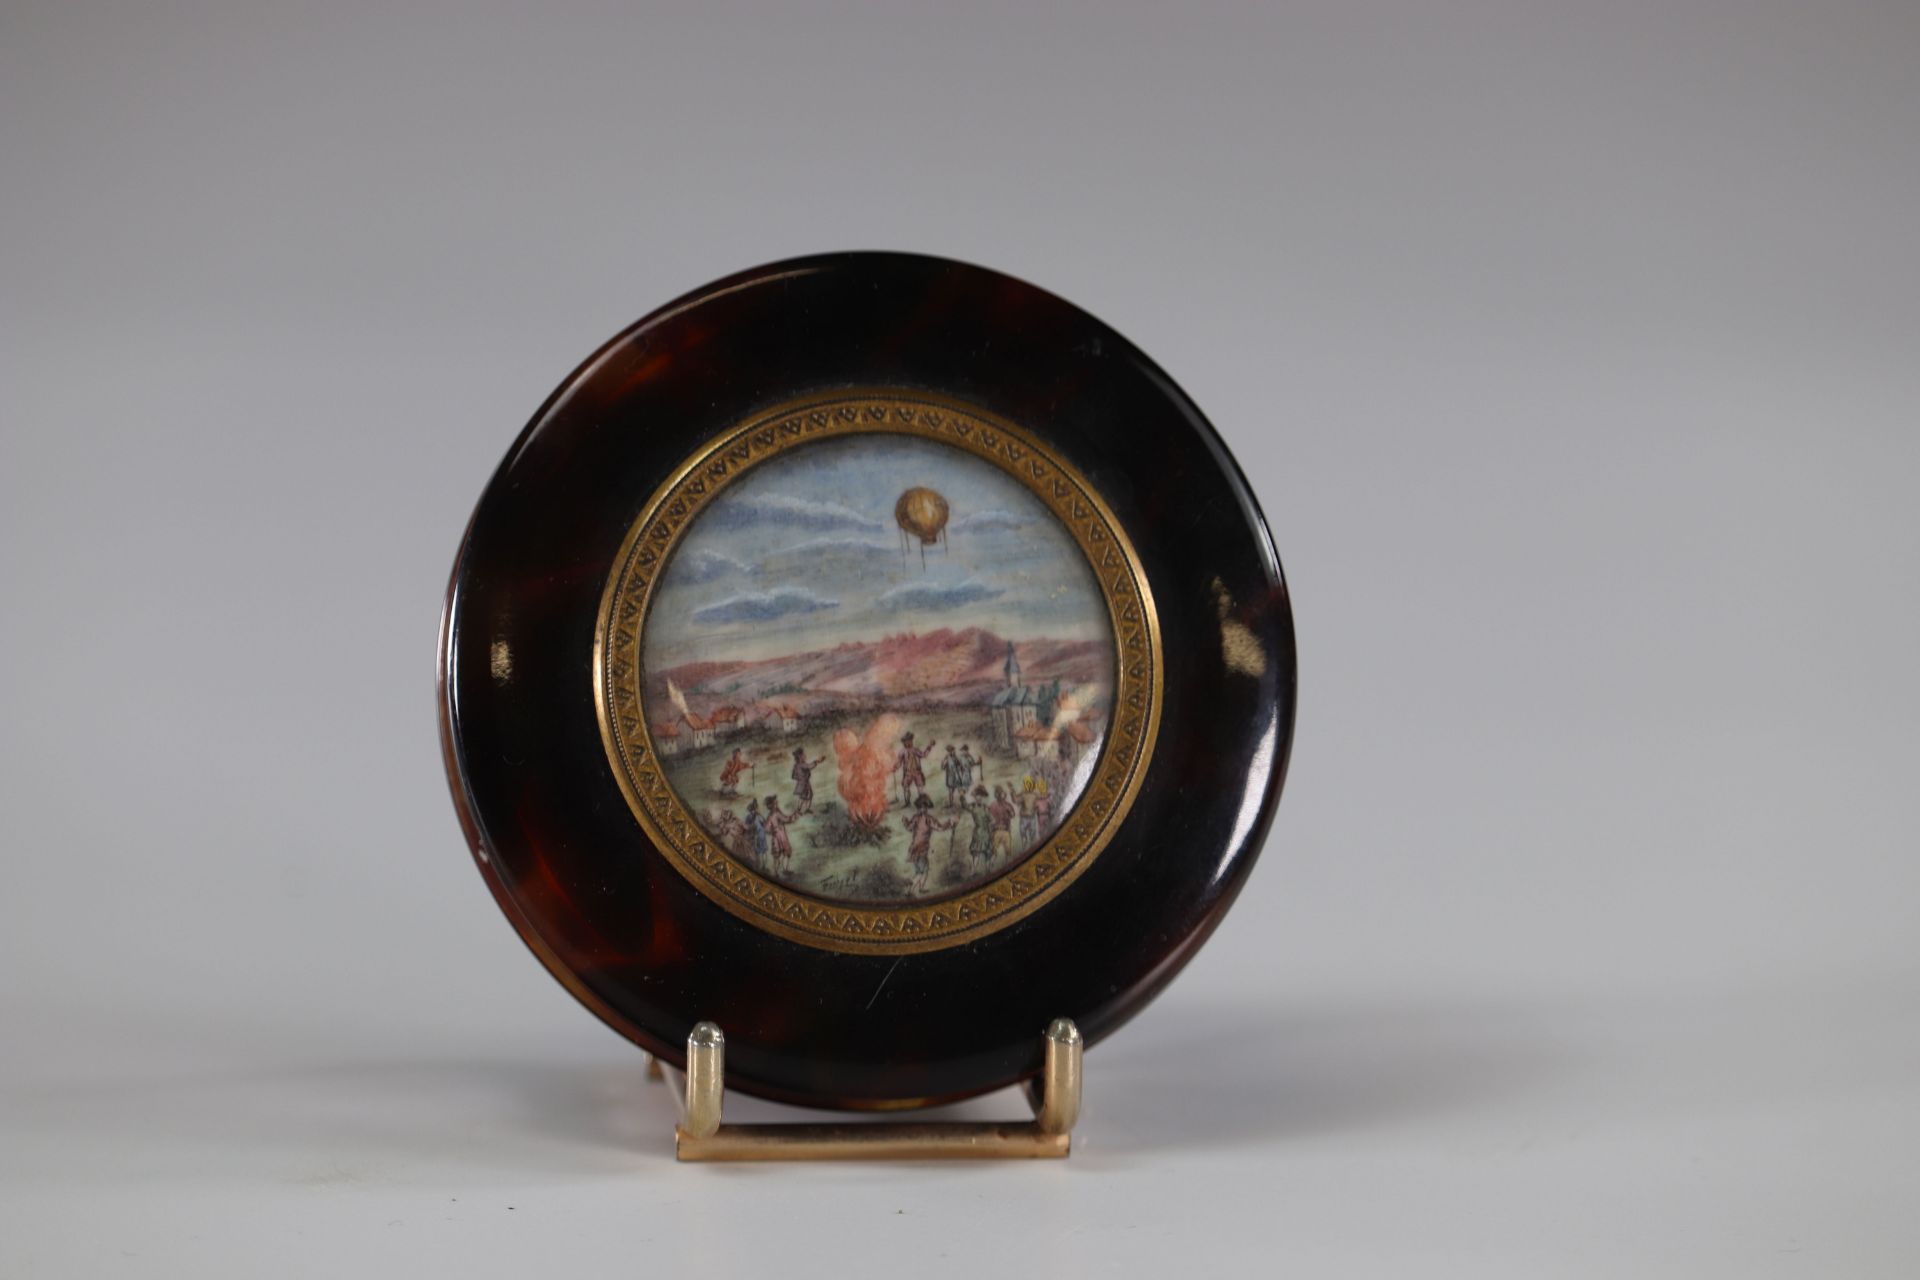 tortoiseshell box decorated with a 19th century hot-air balloon painting